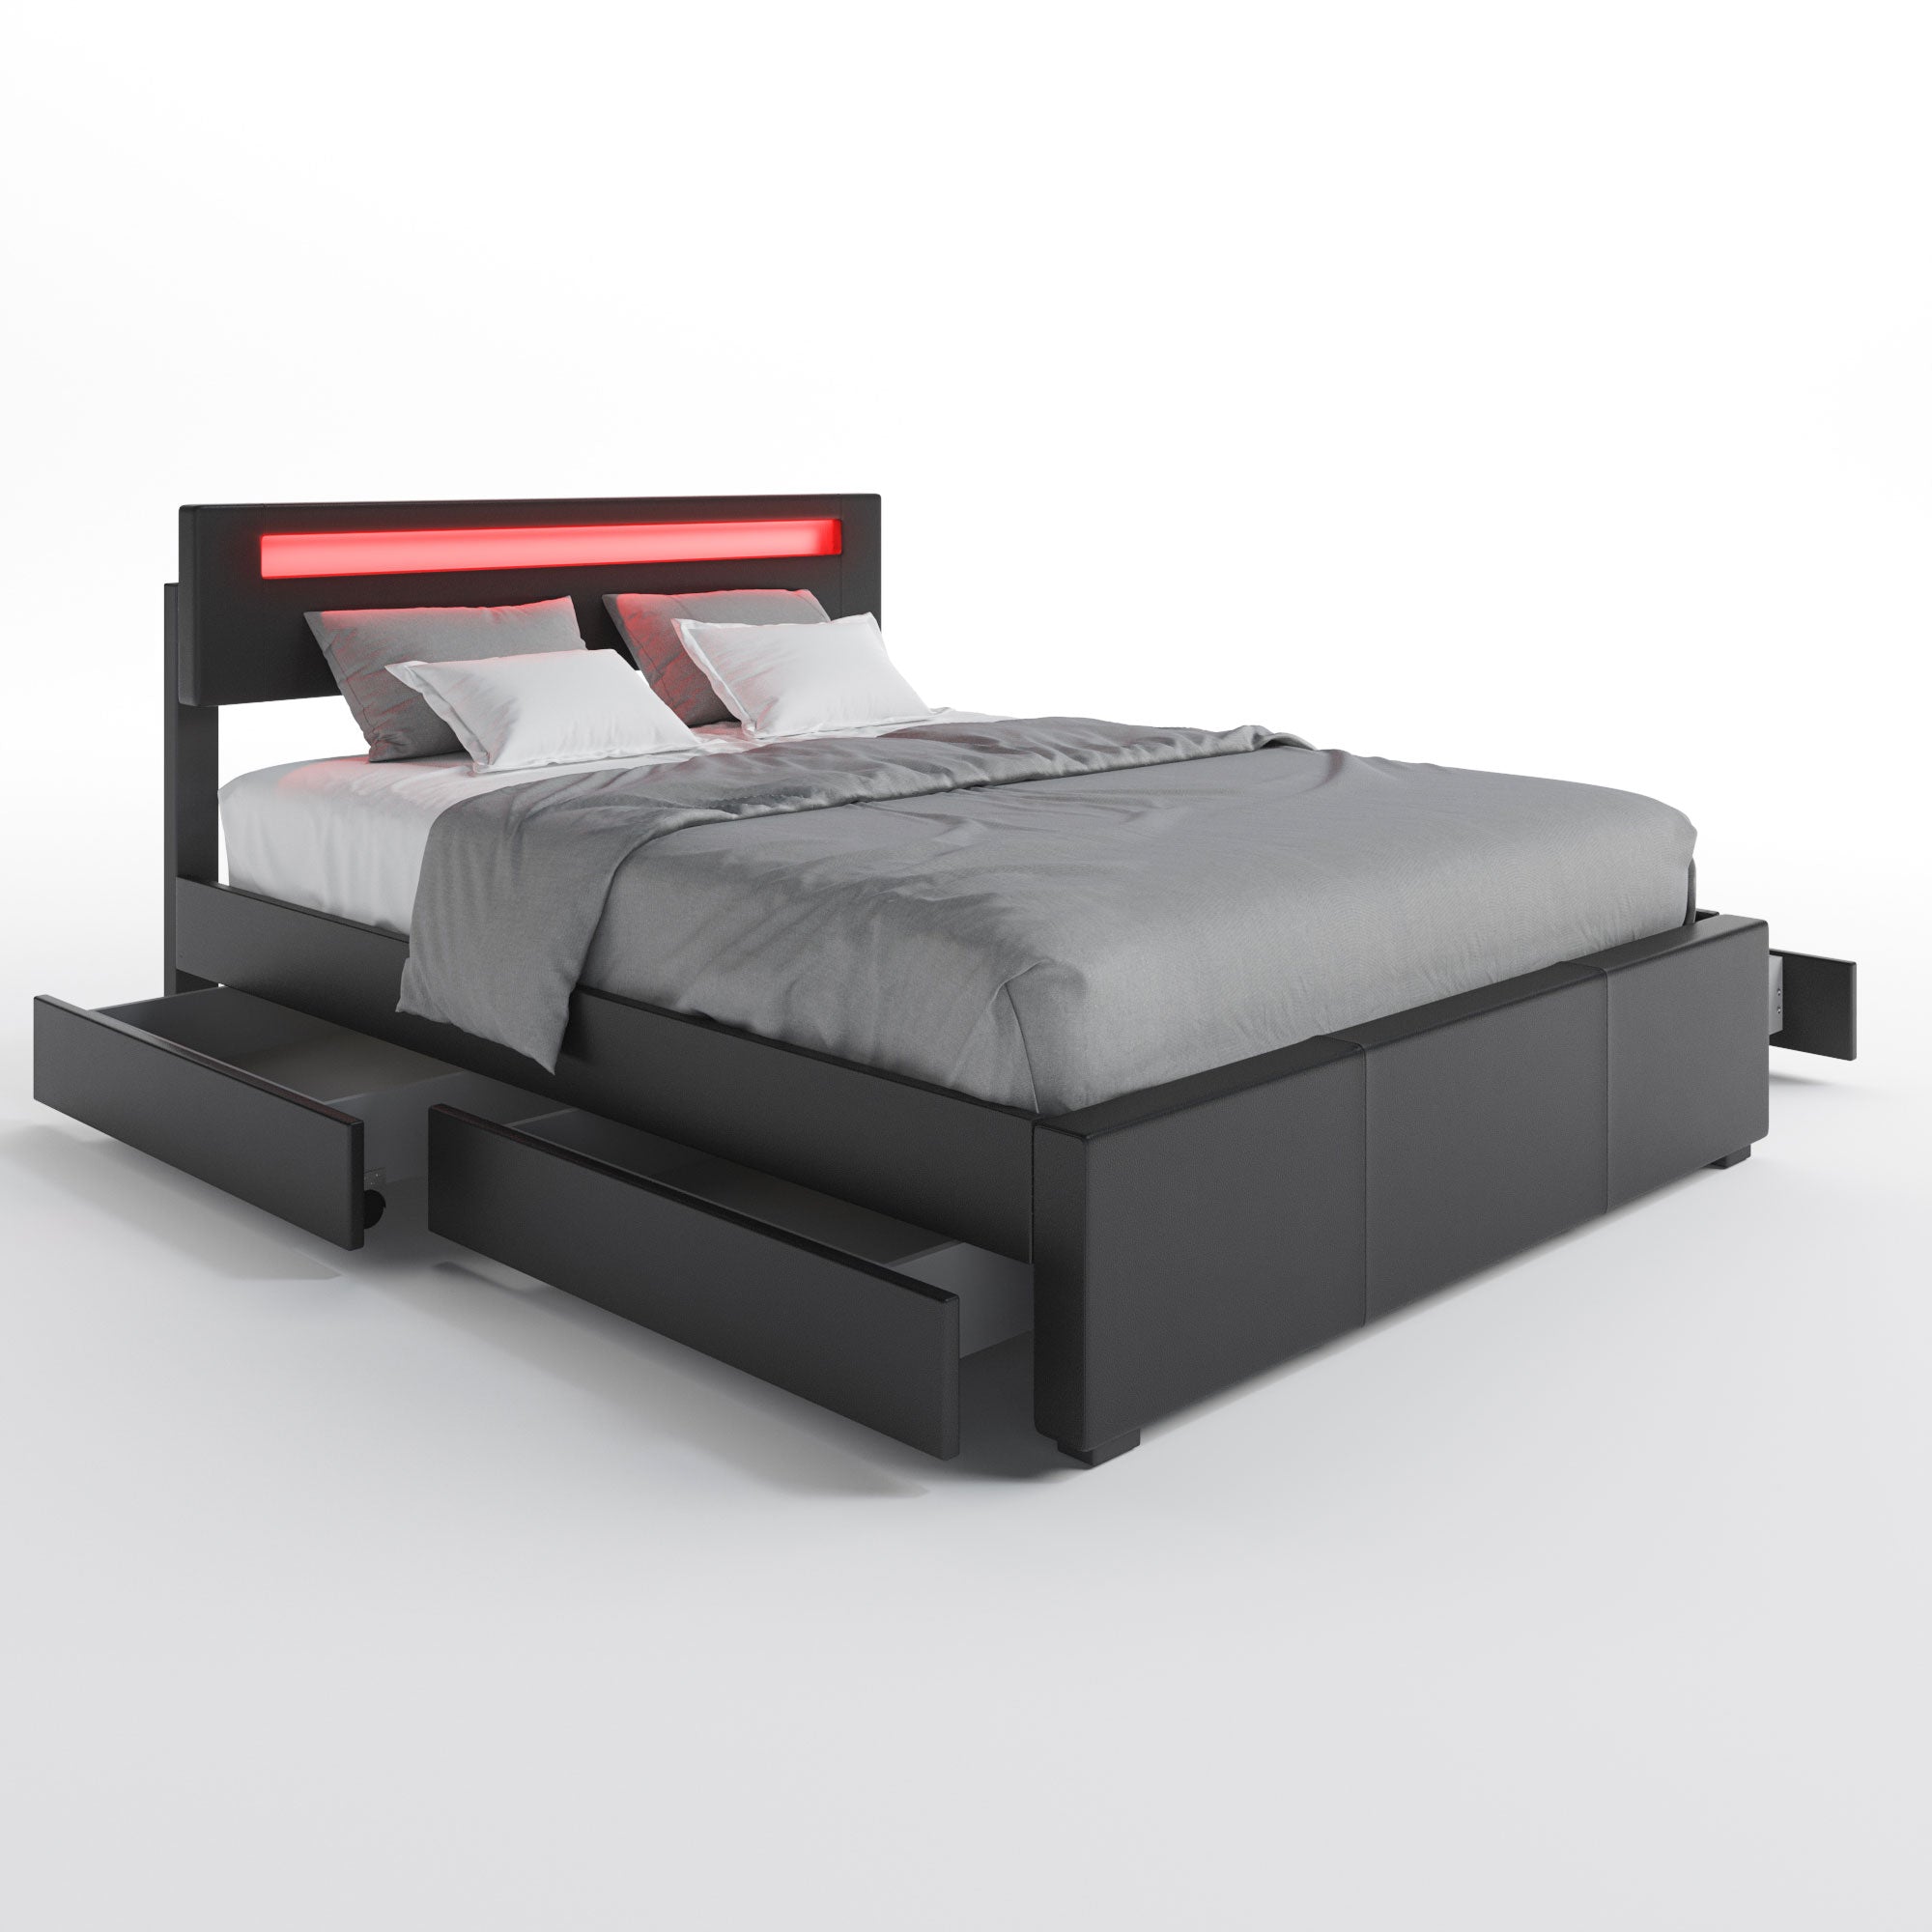 Pezzolla Led Bed Frame With Storage